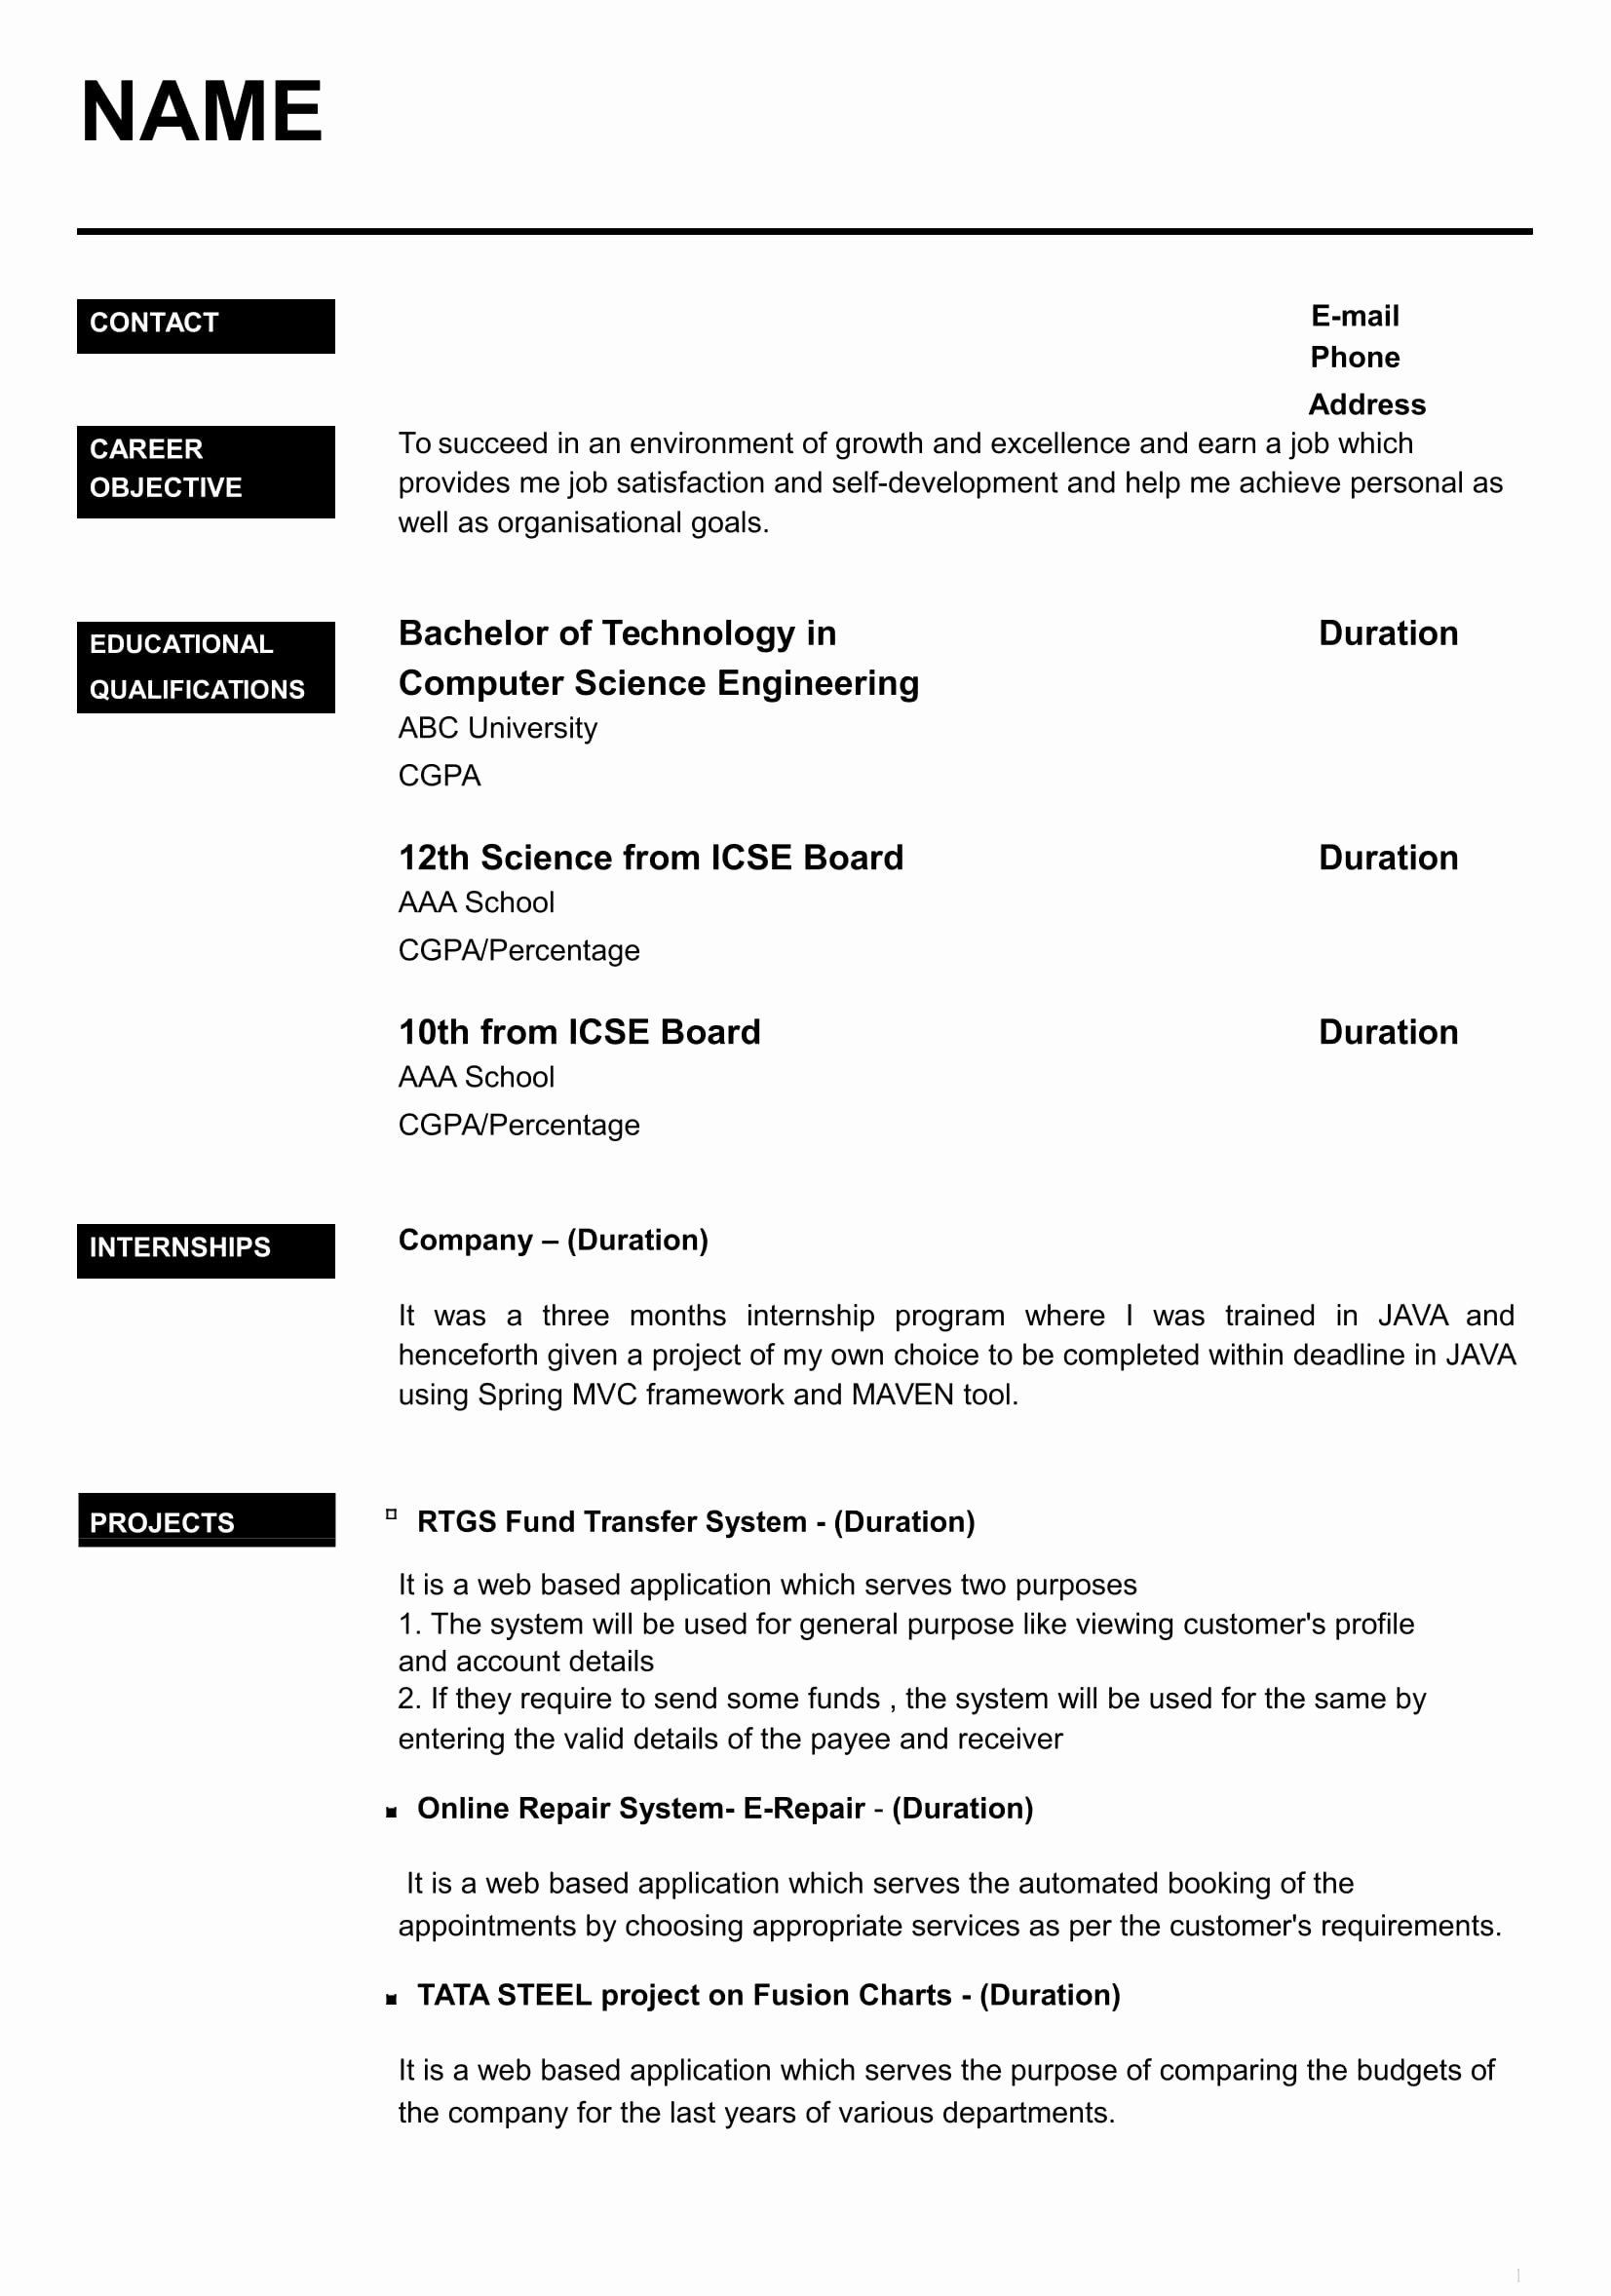 Resume Samples Doc Download for Freshers Resume with Picture Template New 32 Resume Templates for Freshers …